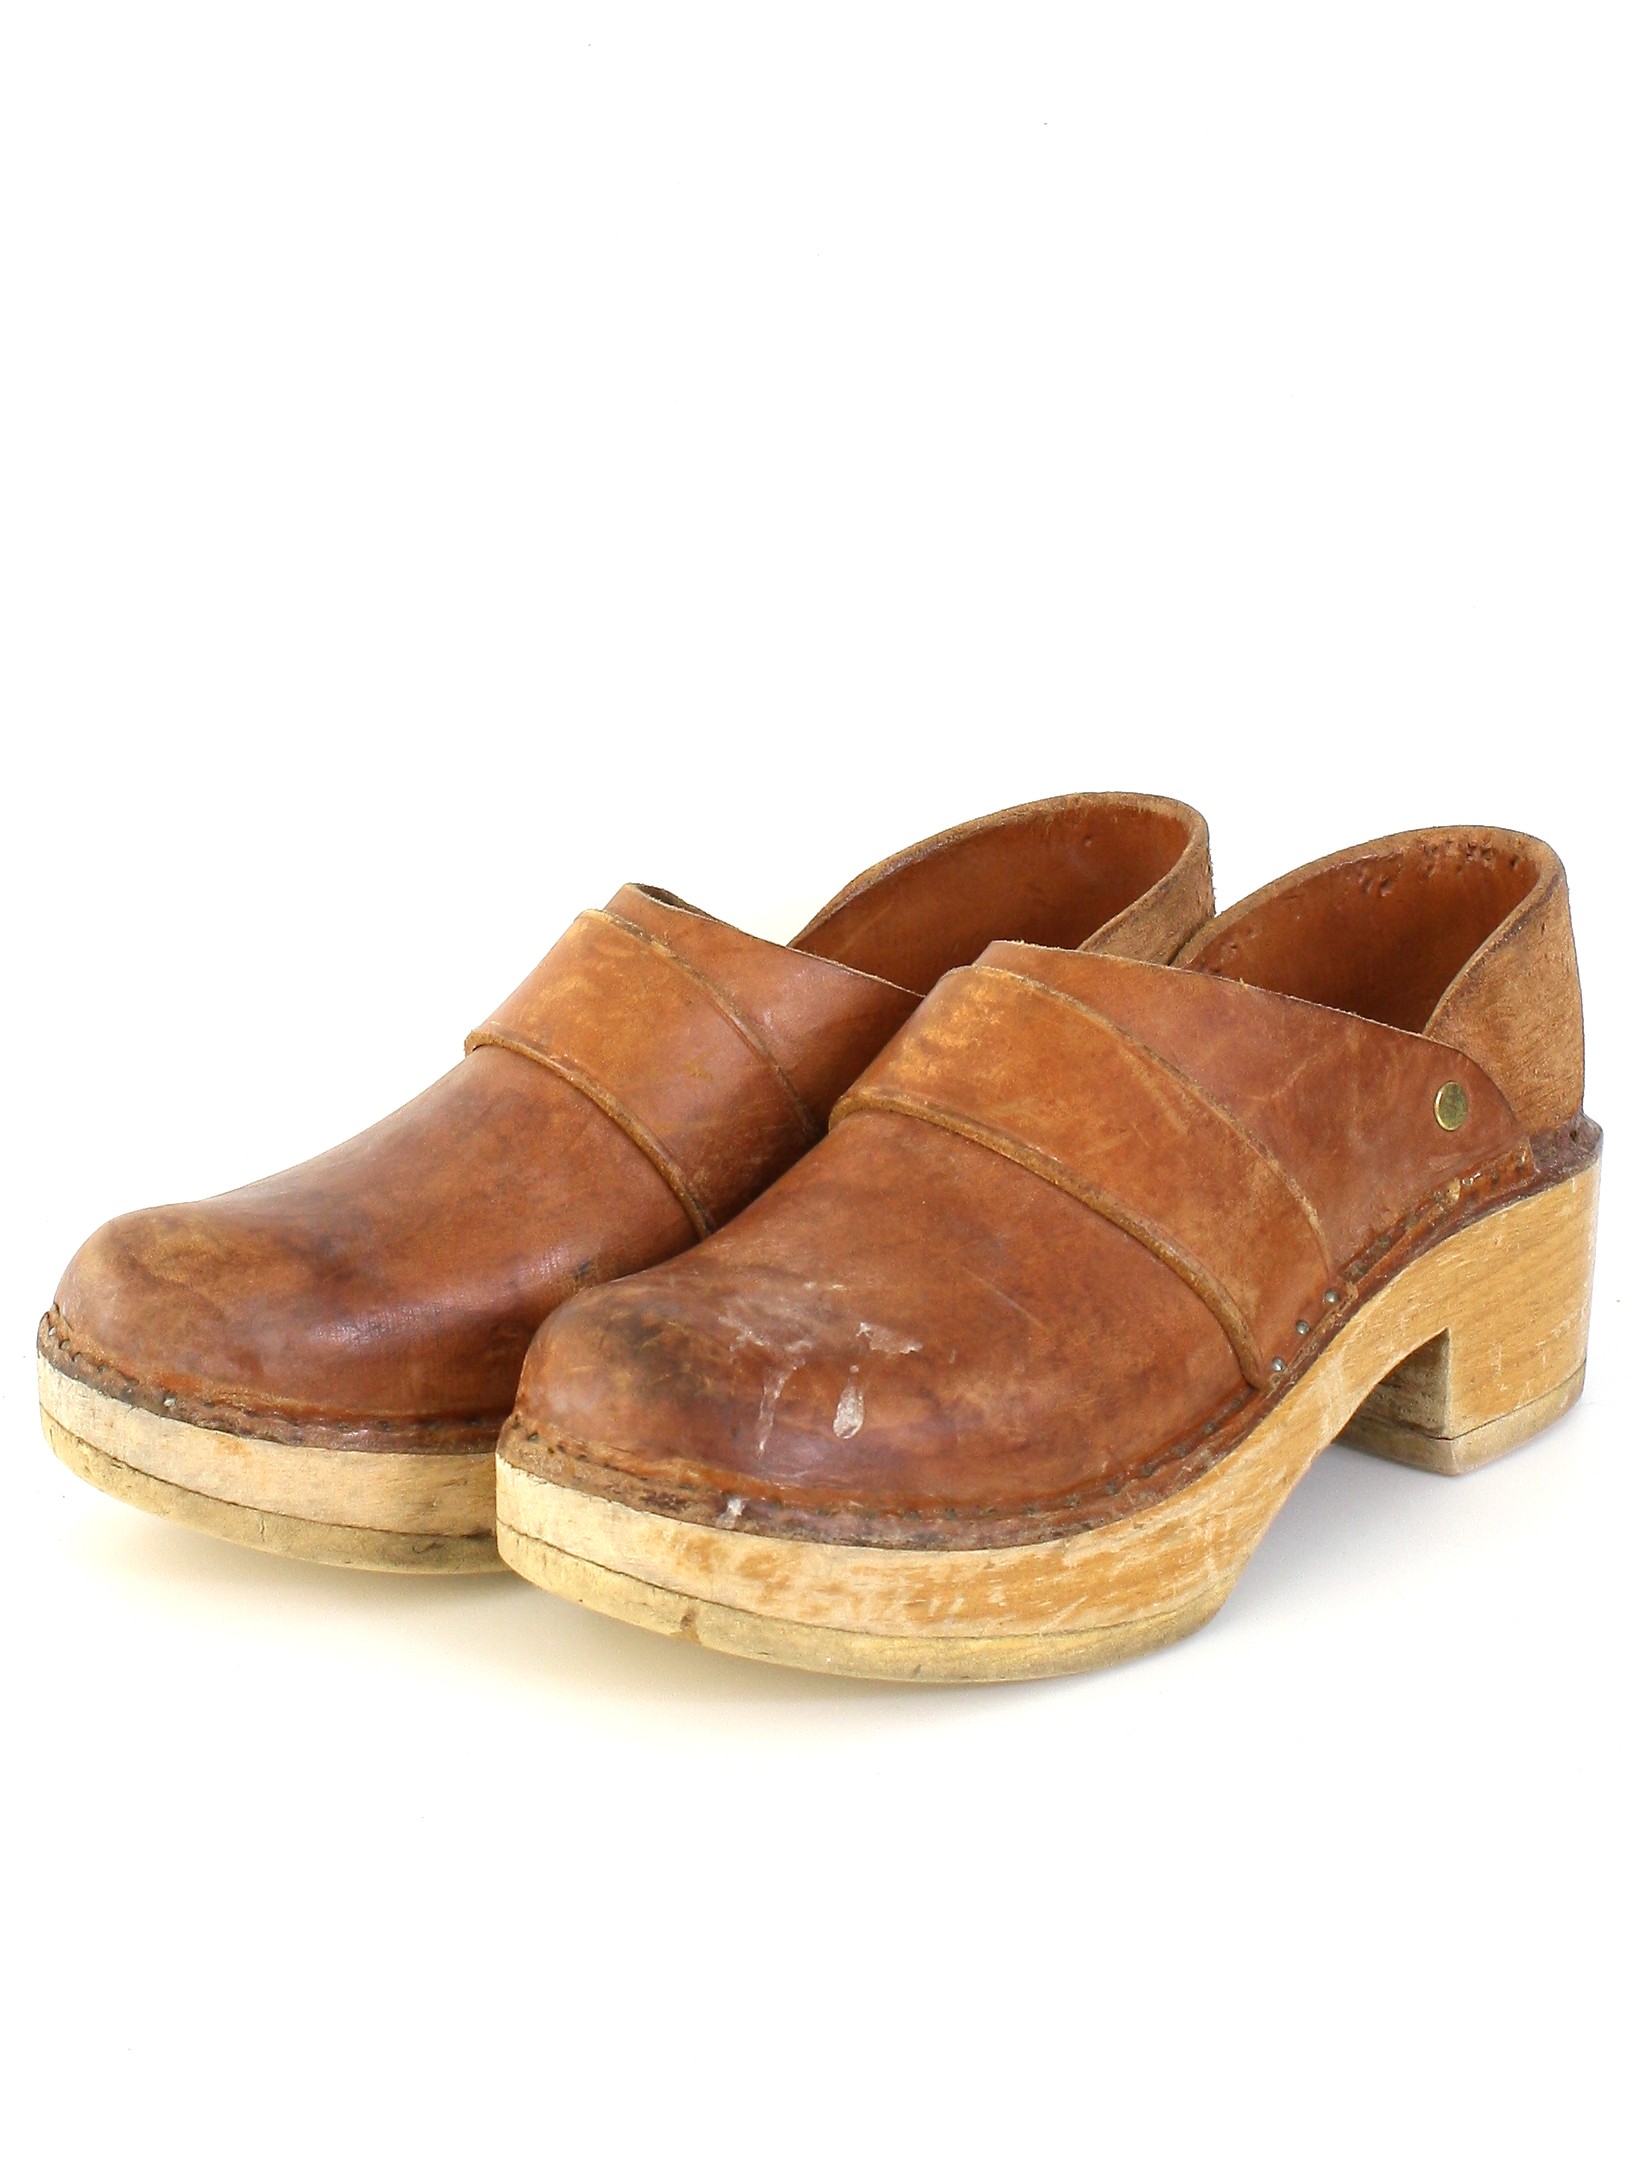 70s wooden clogs